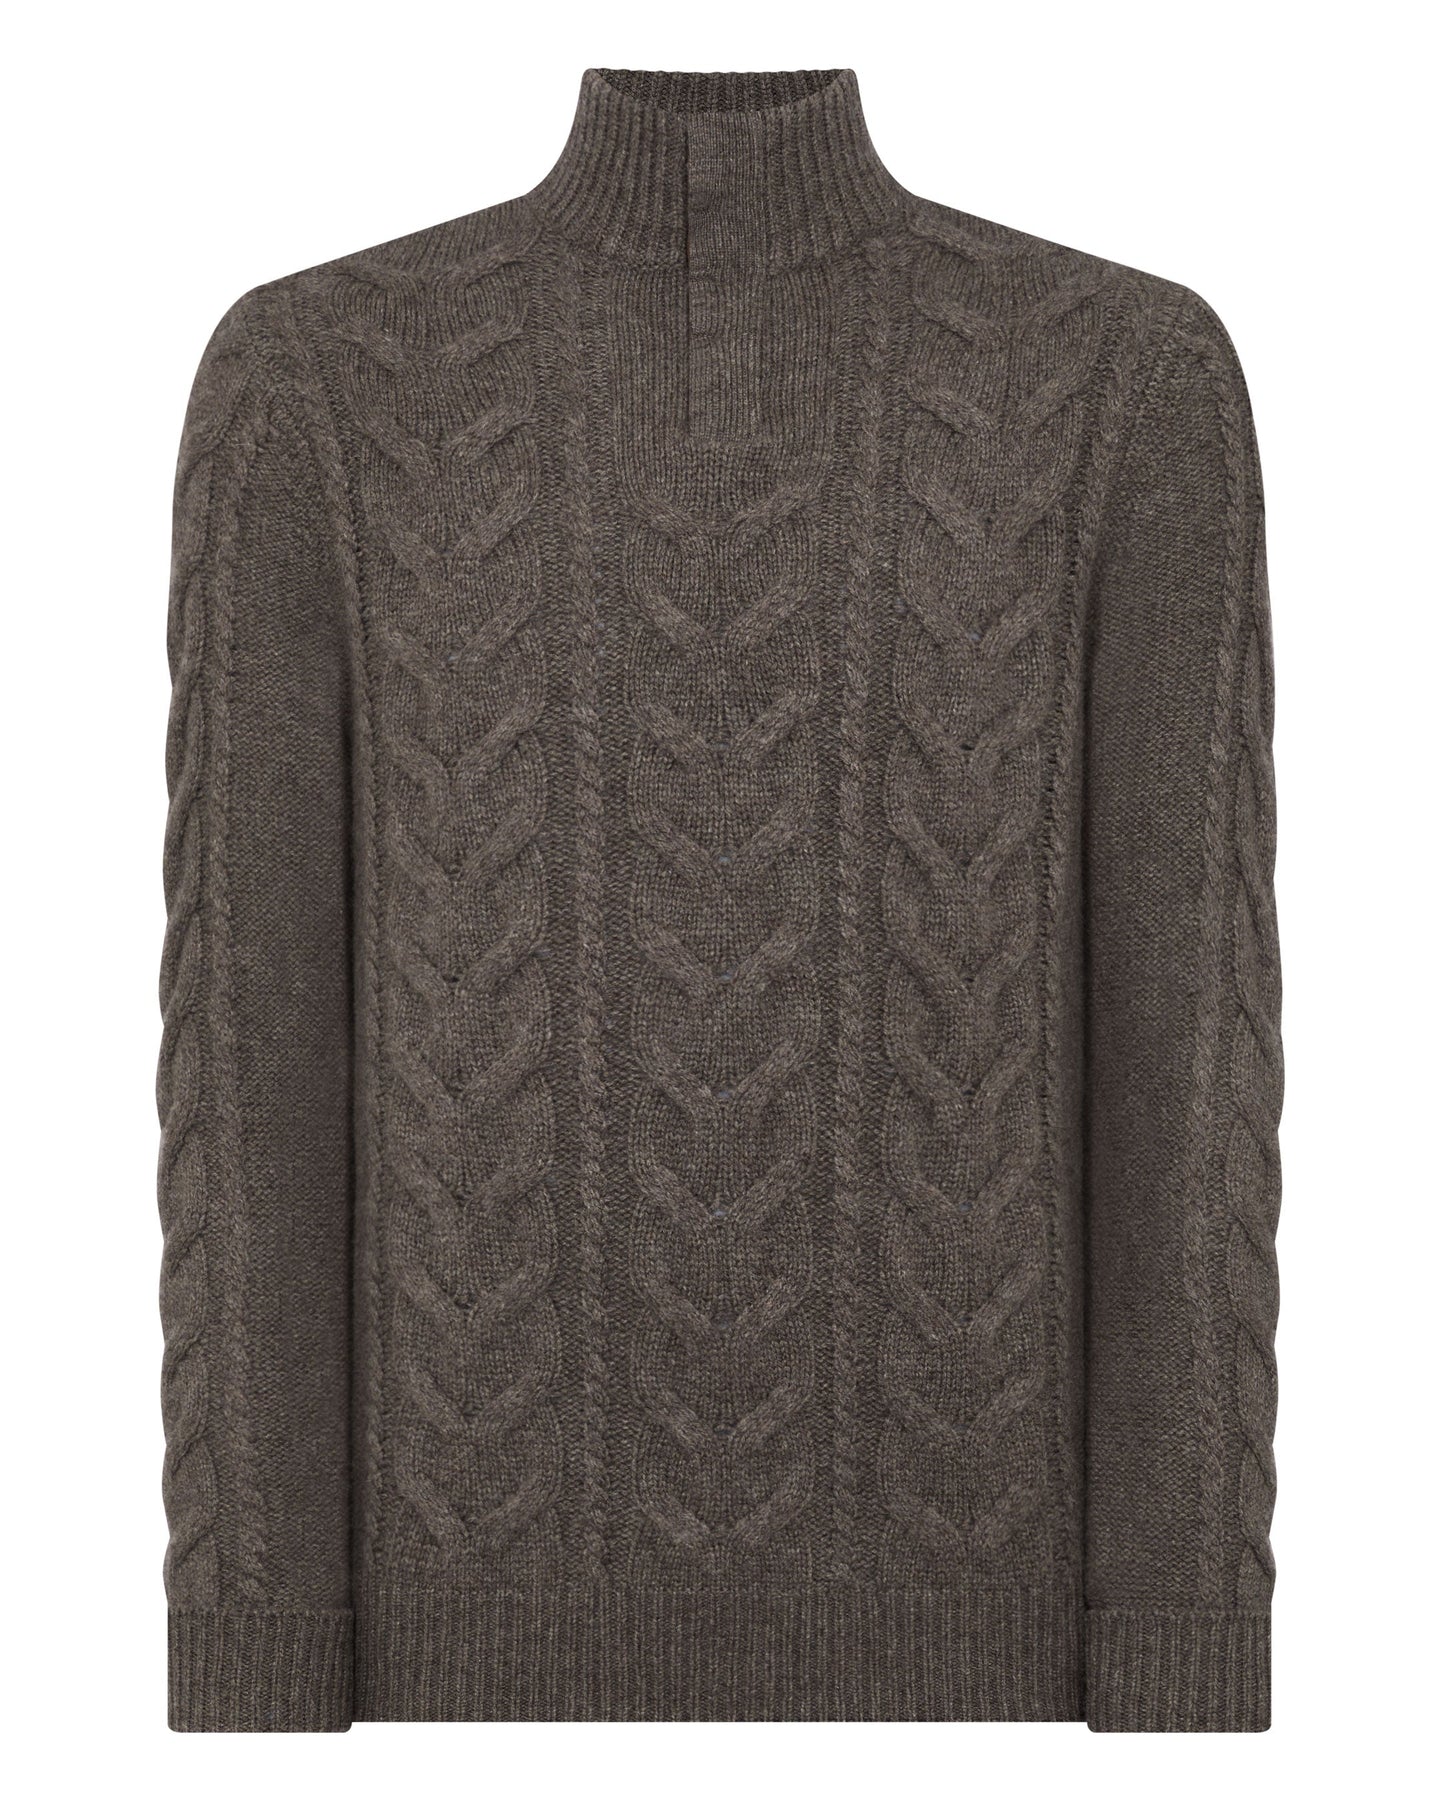 N.Peal Men's The Hampstead Cable Cashmere Jumper Biscotti Brown